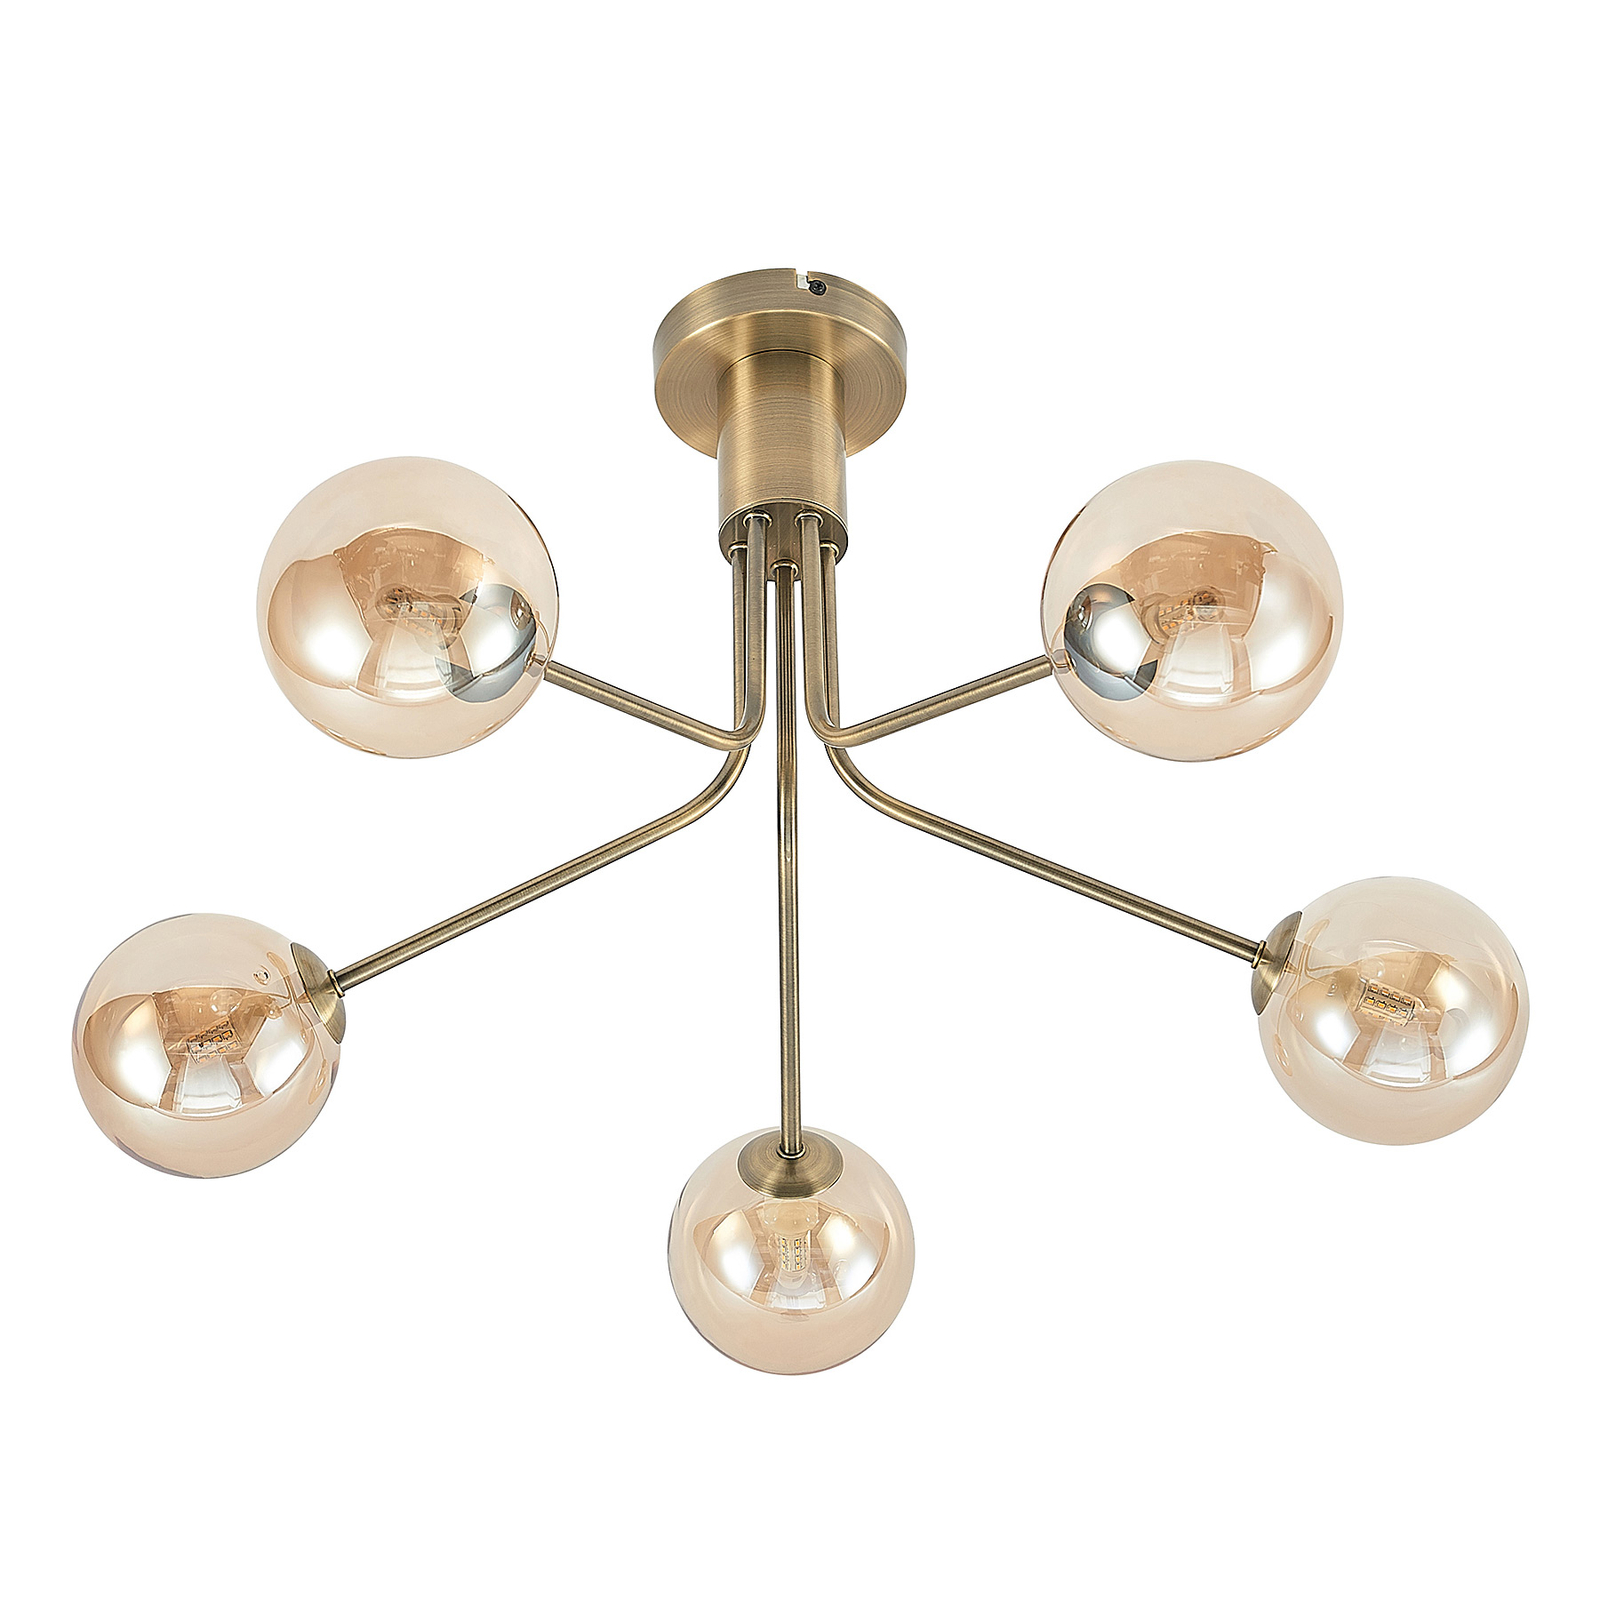 Lucande Wynona plafondlamp, 5-lamps, oudmessing